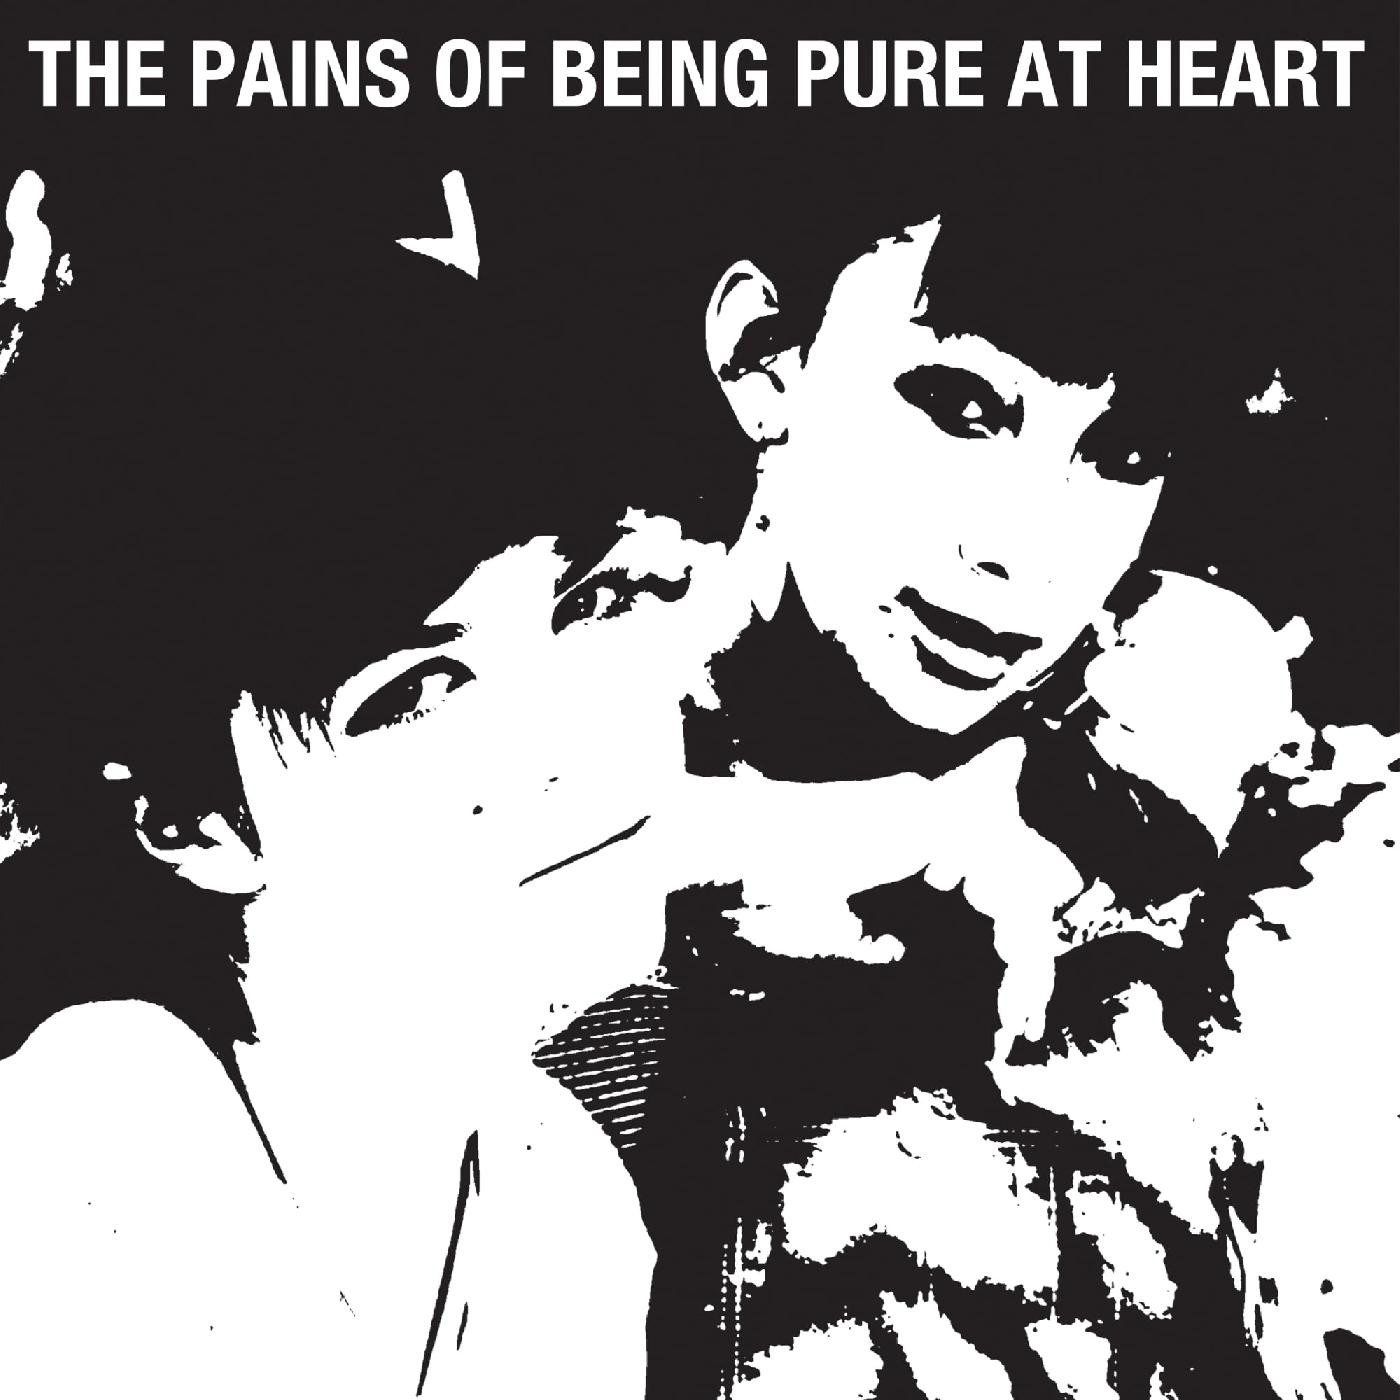 PAINS OF BEING PURE AT HEART / ペインズ・オブ・ビーイング・ピュア・アット・ハート / THE PAINS OF BEING PURE AT HEART (VINYL)